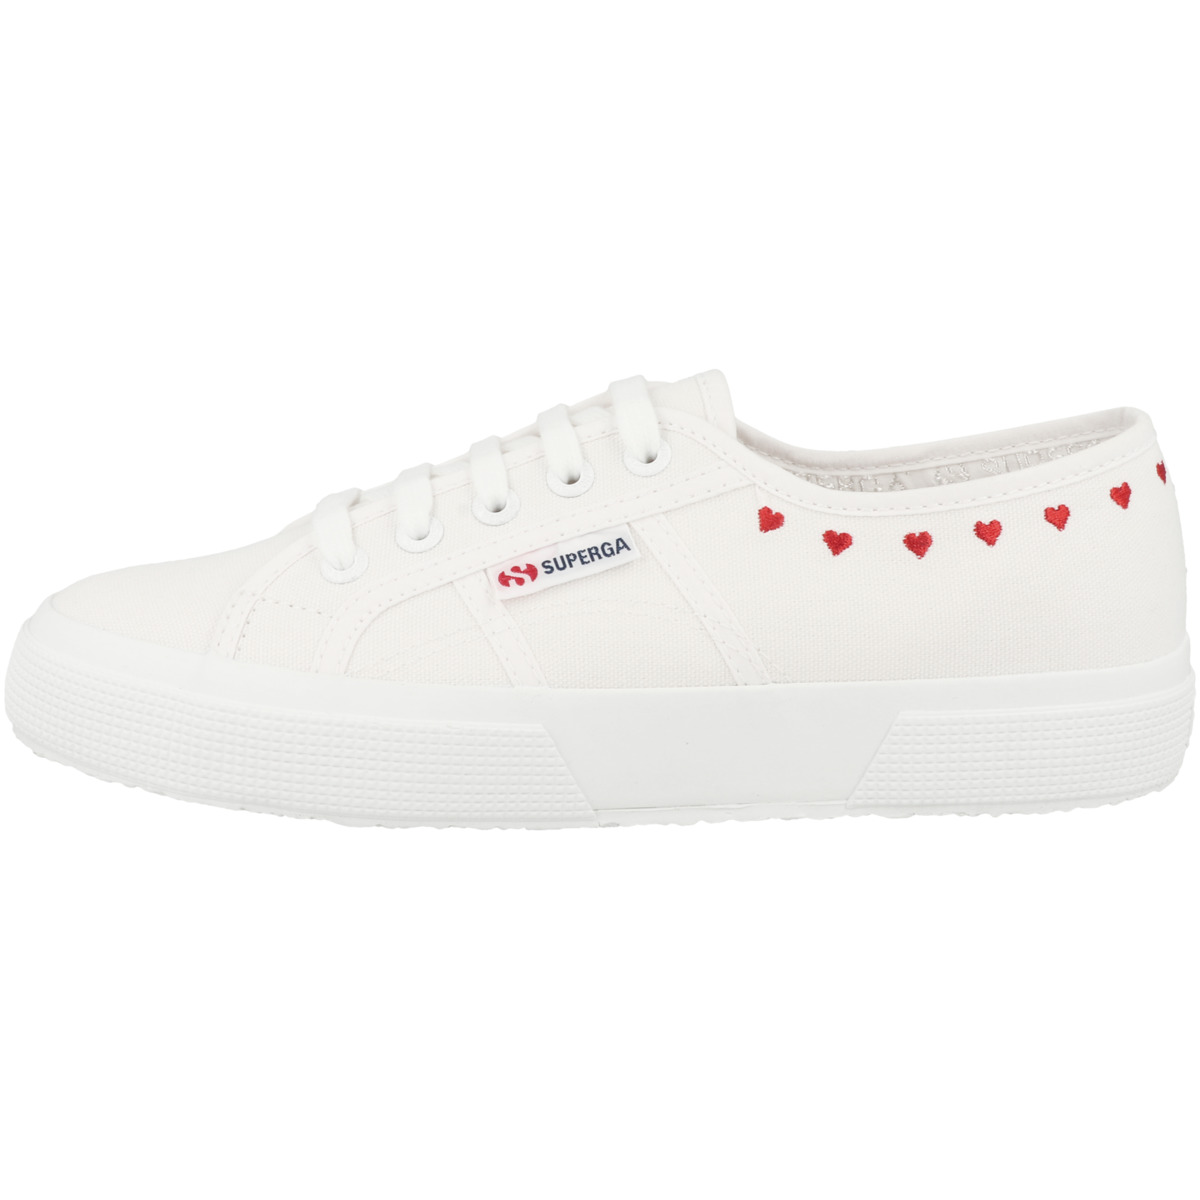 Superga 2750 Little Heart Embroidery Sneaker low